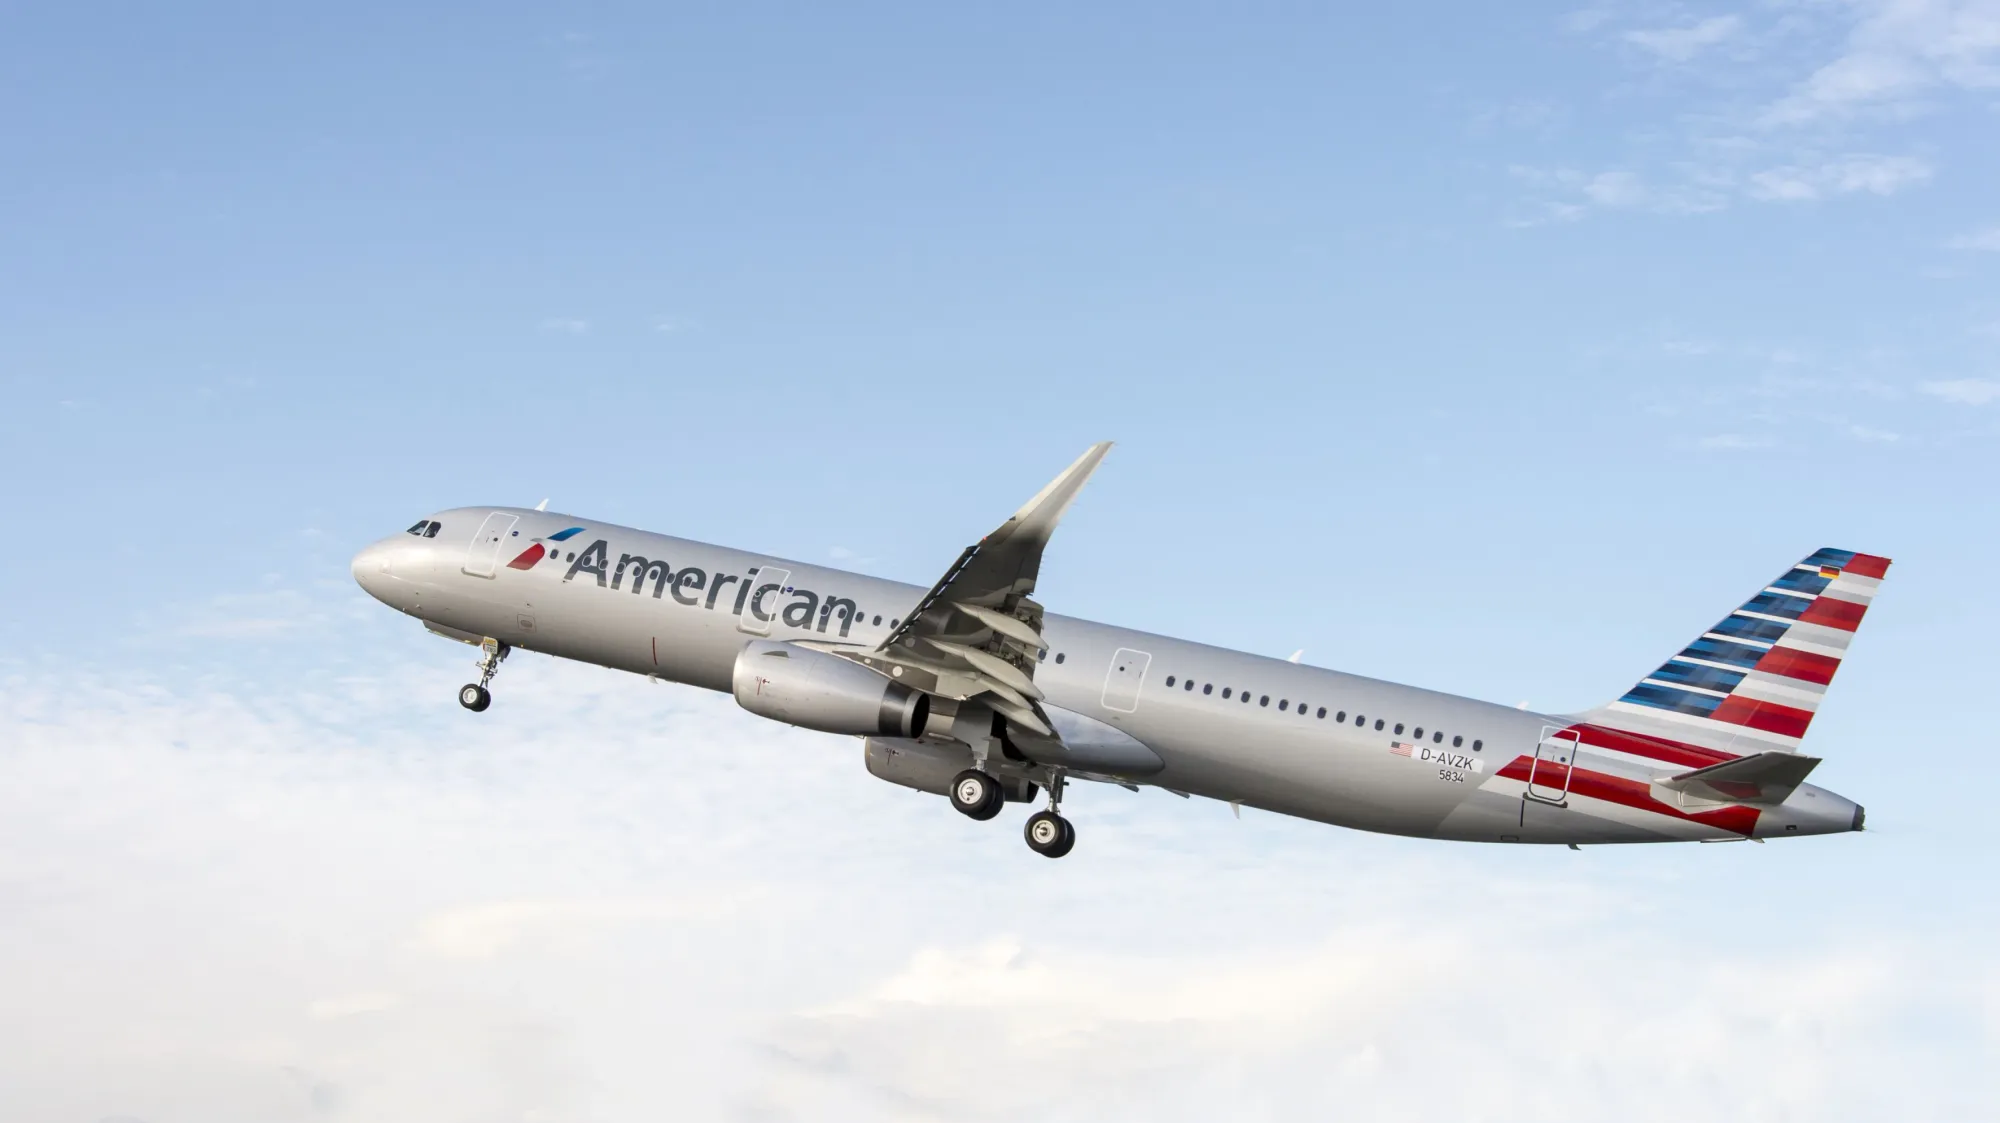 American Airlines Pilot Captain Robert Snow Has Post Vaccine Cardiac Arrest 6 Minutes After Landing Airbus Twin Jet Airliner AAL 1067 at Dallas Airport